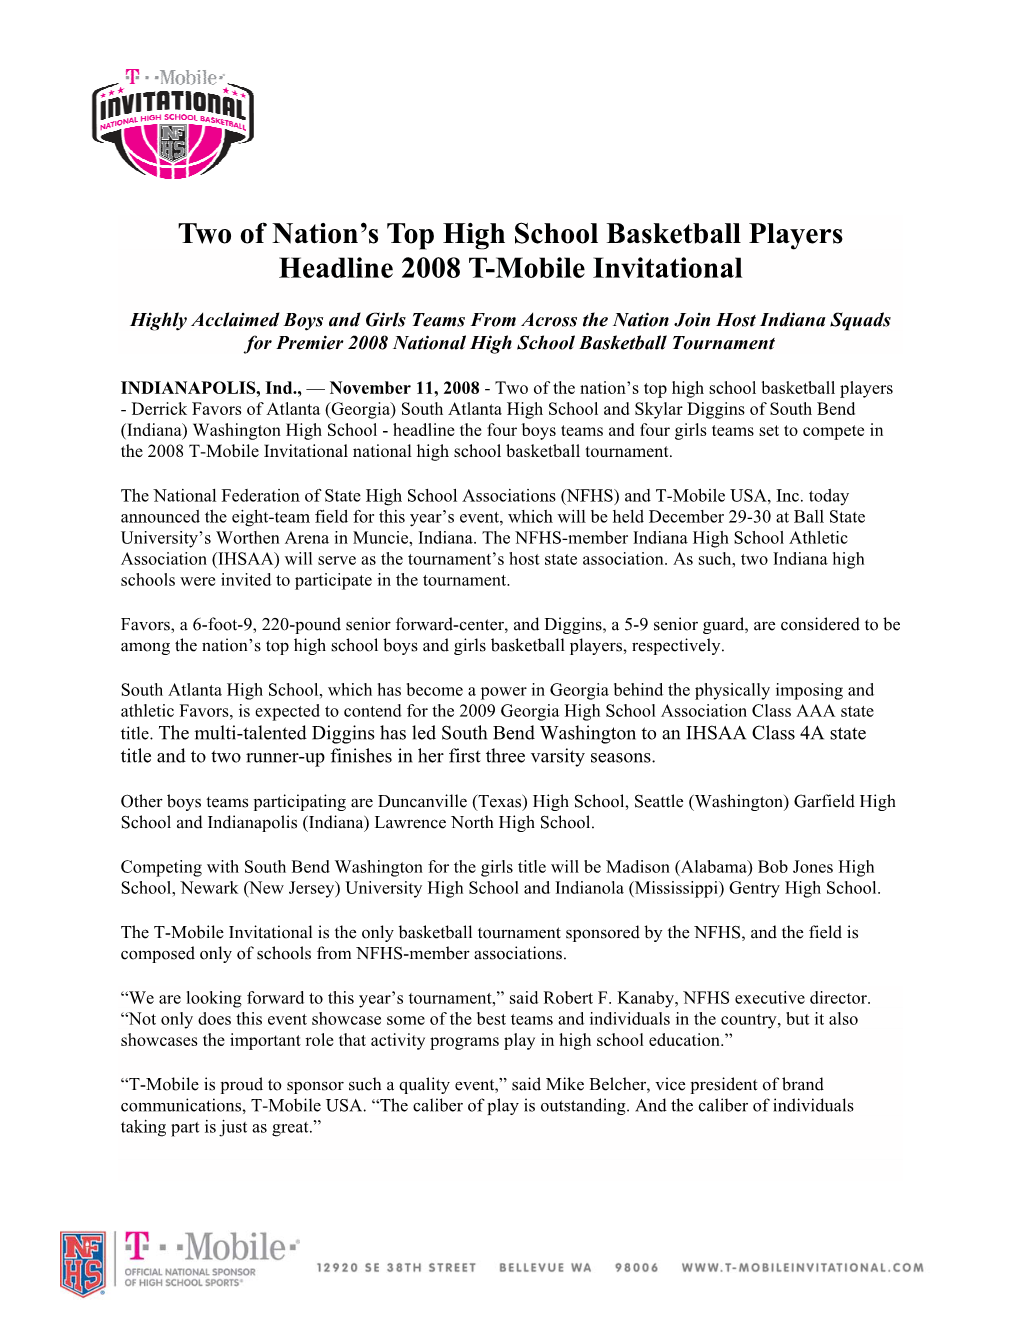 Two of Nation's Top High School Basketball Players Headline 2008 T